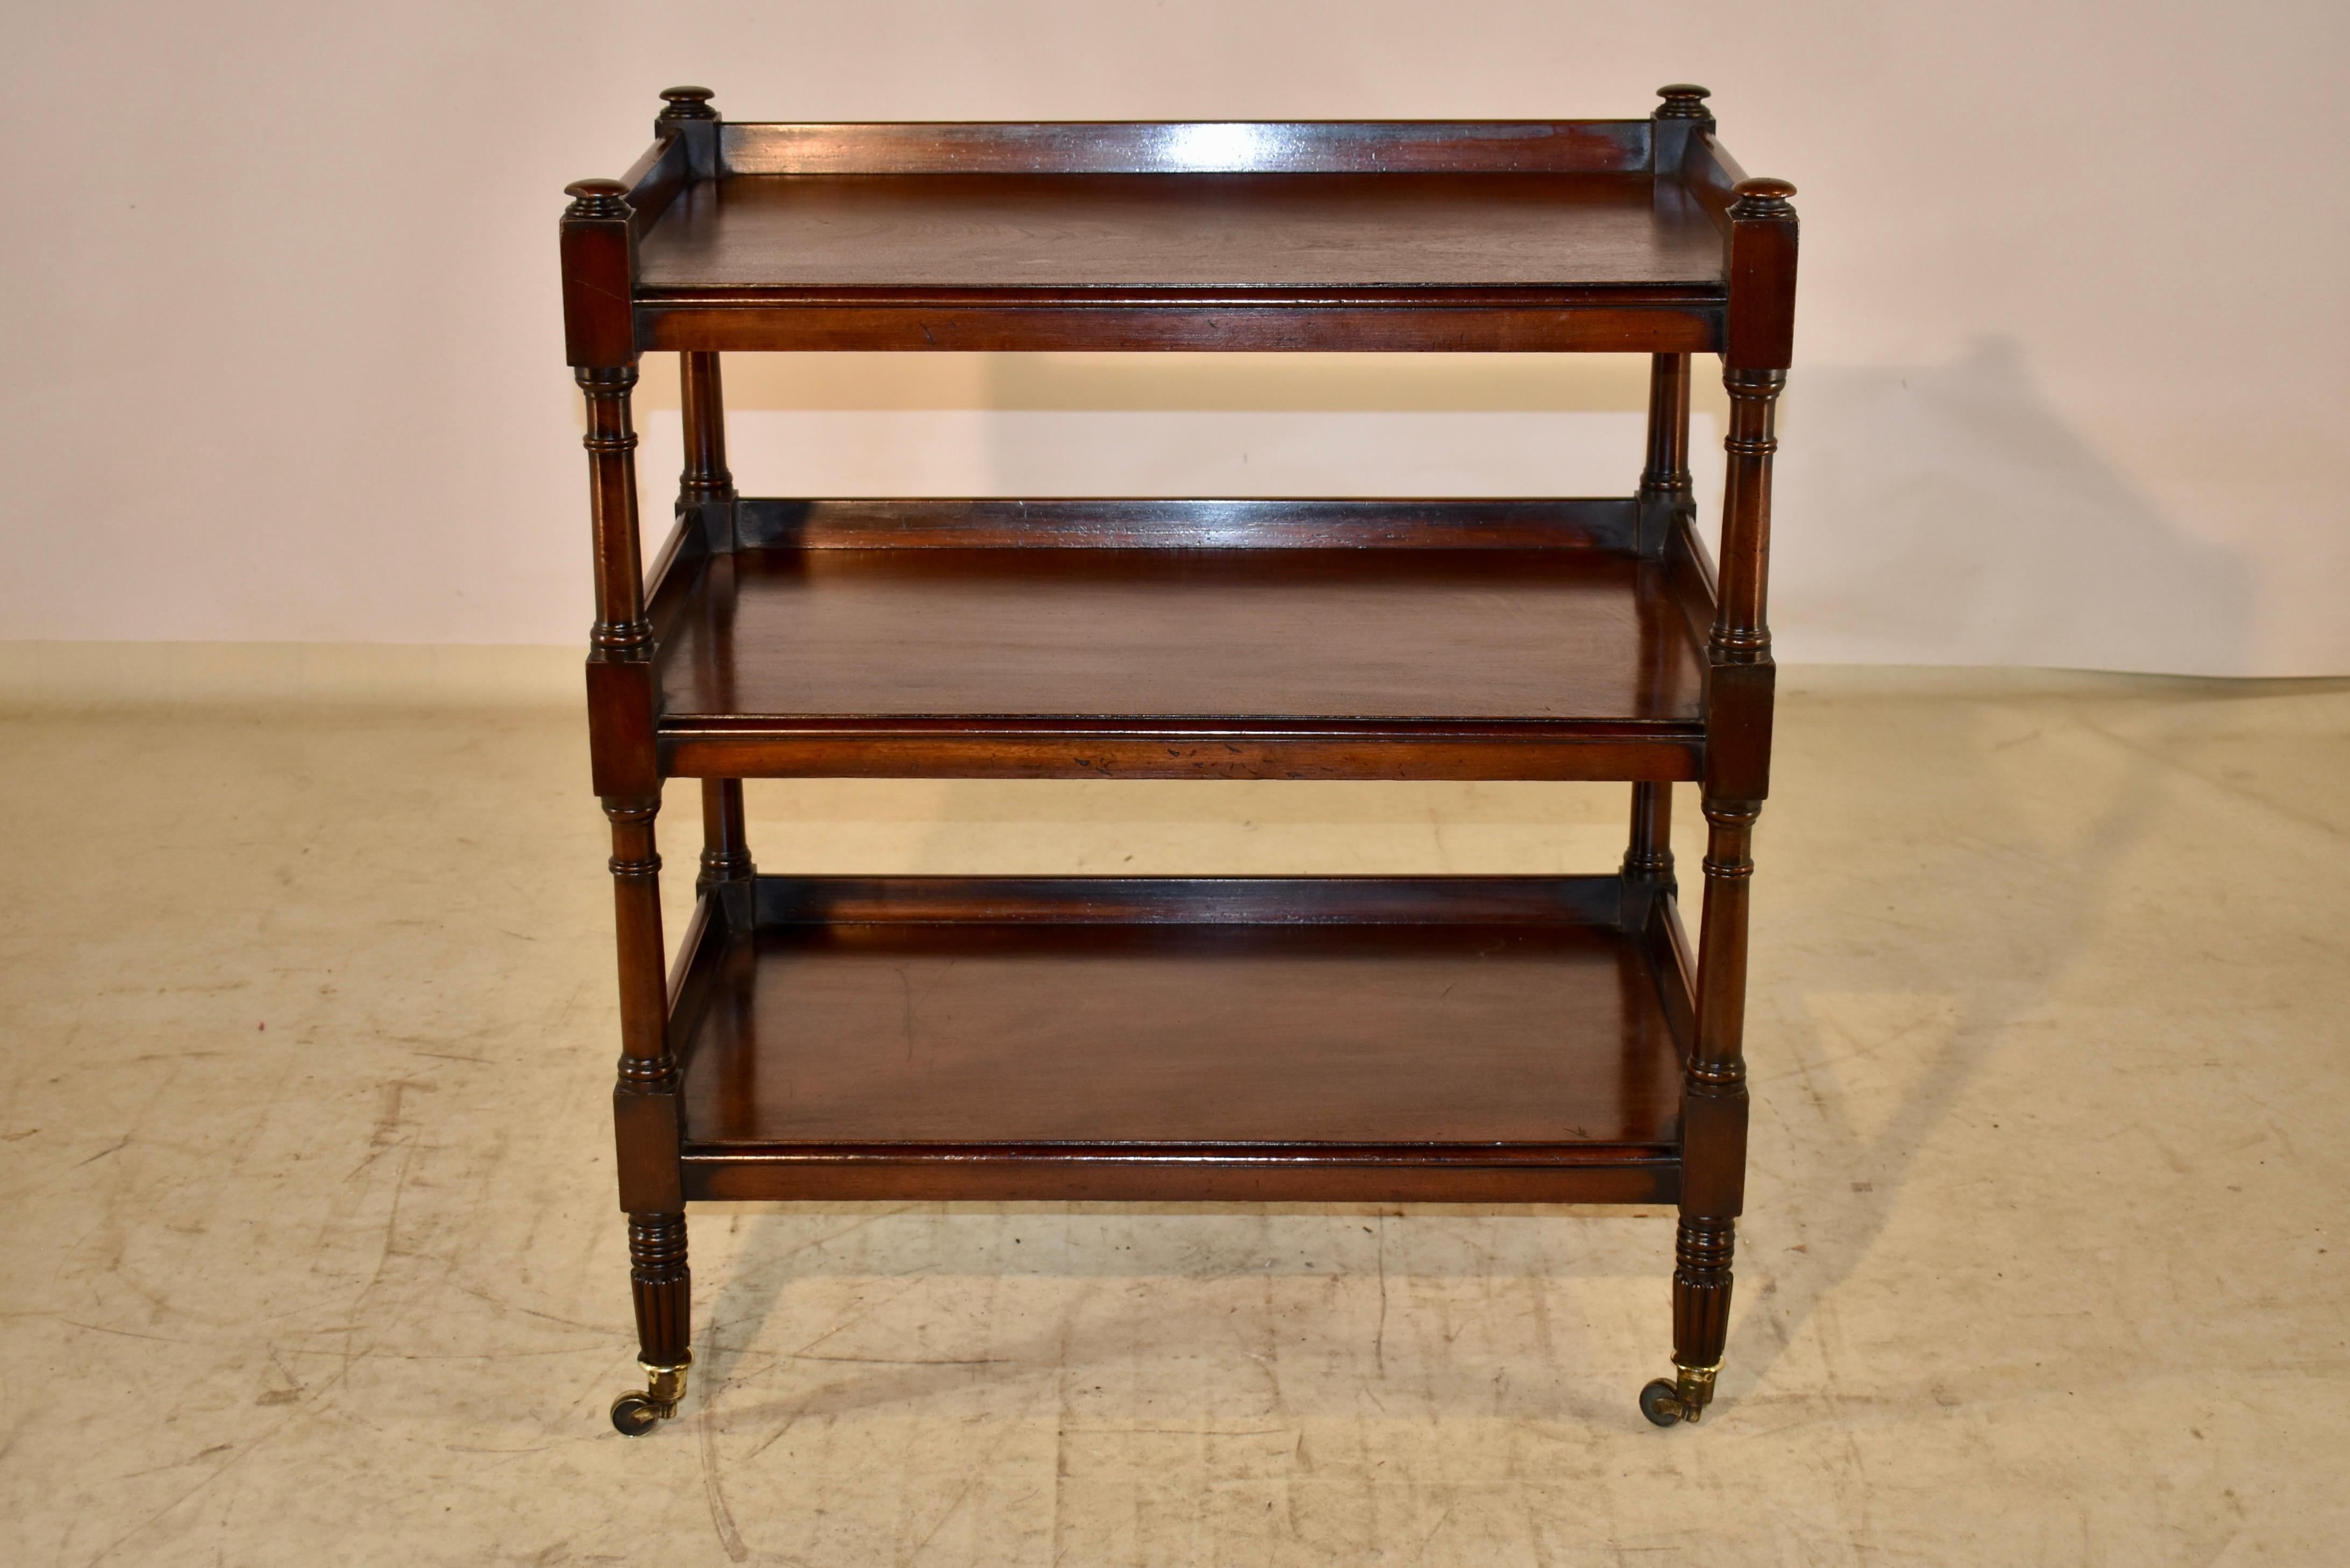 19th century Mahogany dessert buffet from England. the buffet has three shelves, all surrounded on three sides by galleries. The front edges of the shelves are beveled, and have simple aprons. The shelves are made from single boards, and are